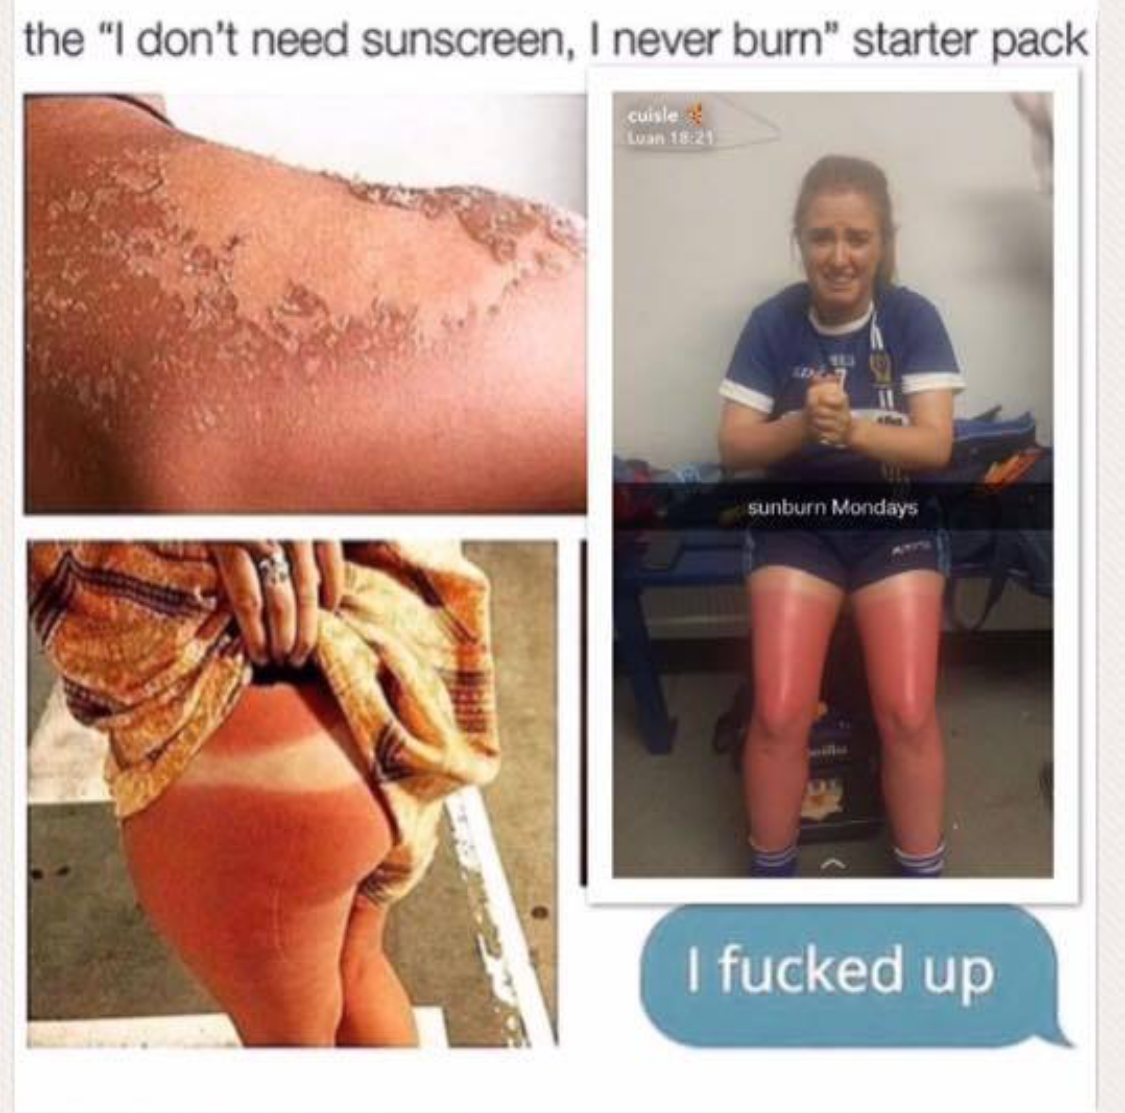 I don't need sunscreen starter pack of girls burned by the sun